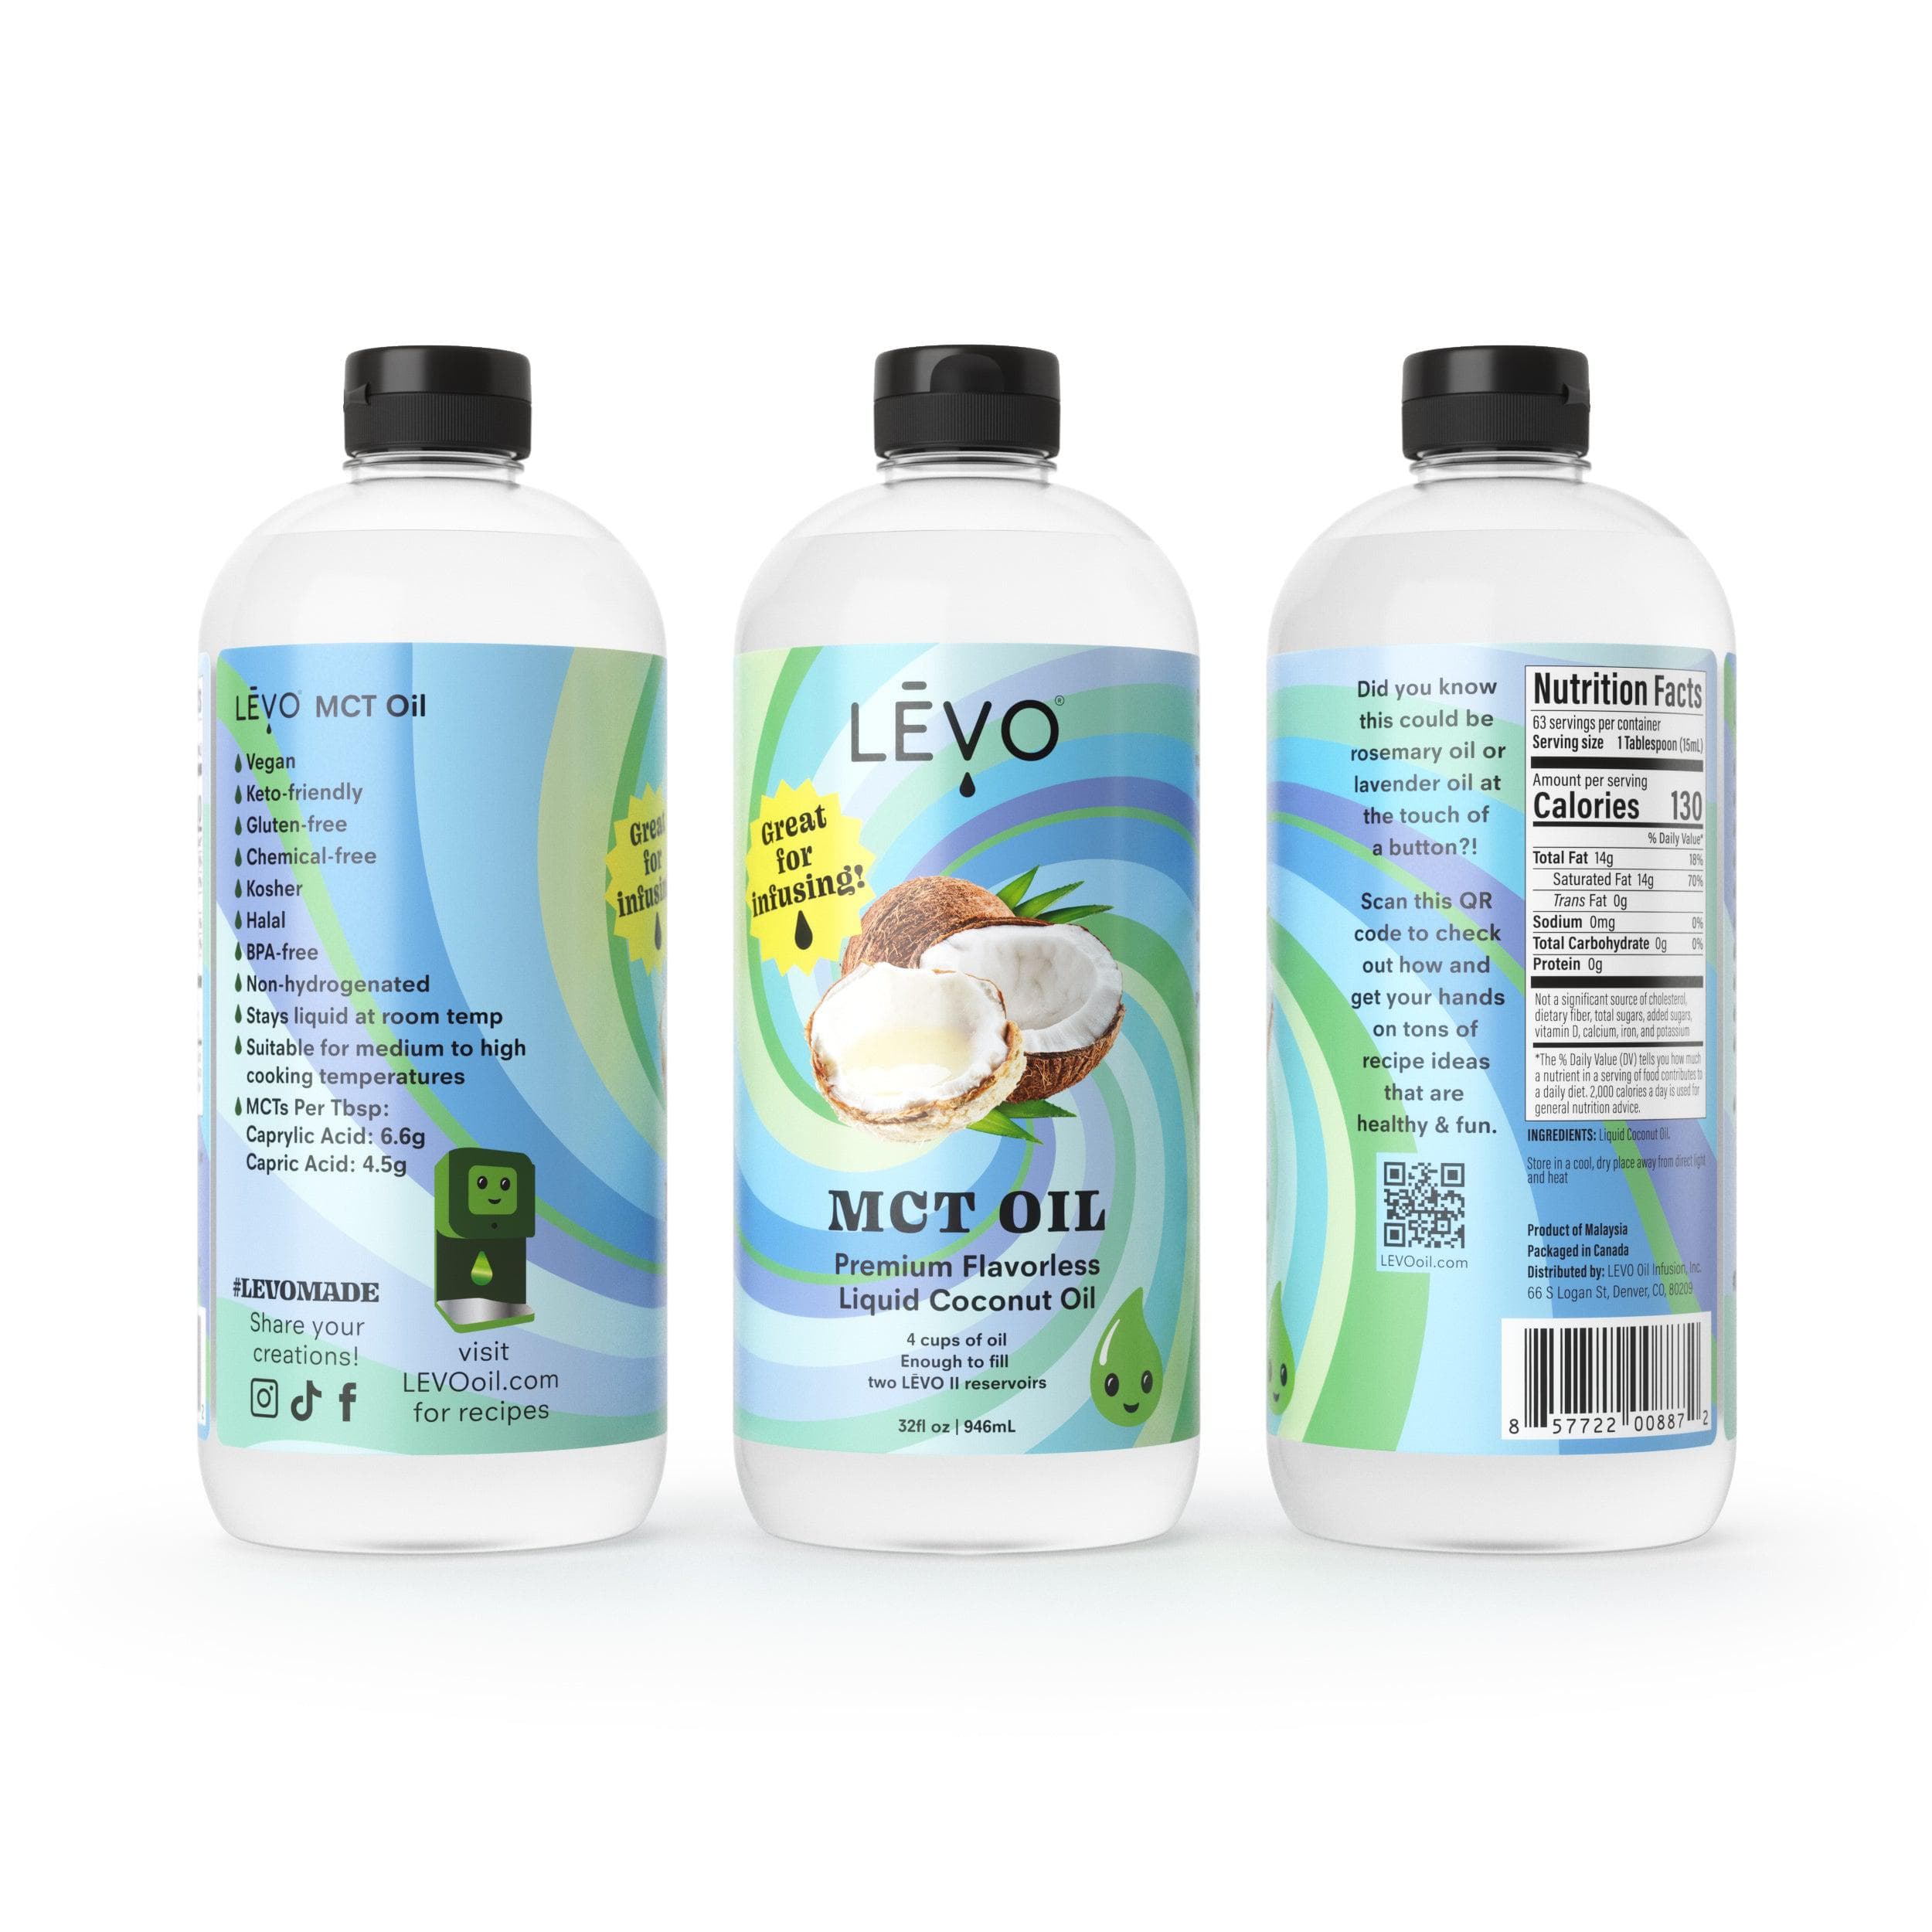 LĒVO II Gummy Making Kit - Herbal Oil & Butter Infusion - Shop Now